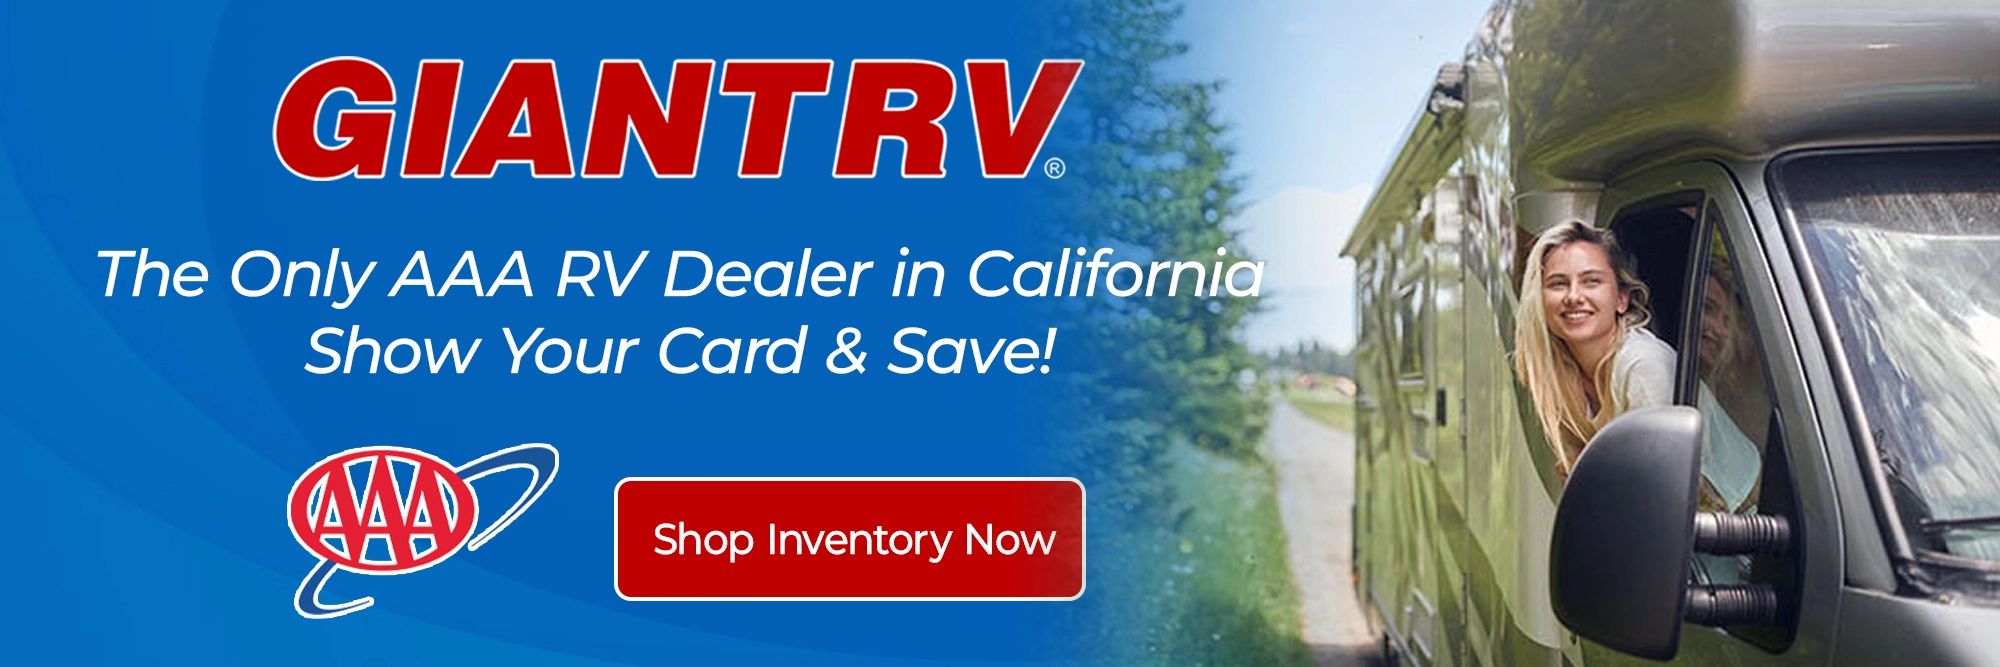 Giant RV - The Only AAA RV Dealer in California